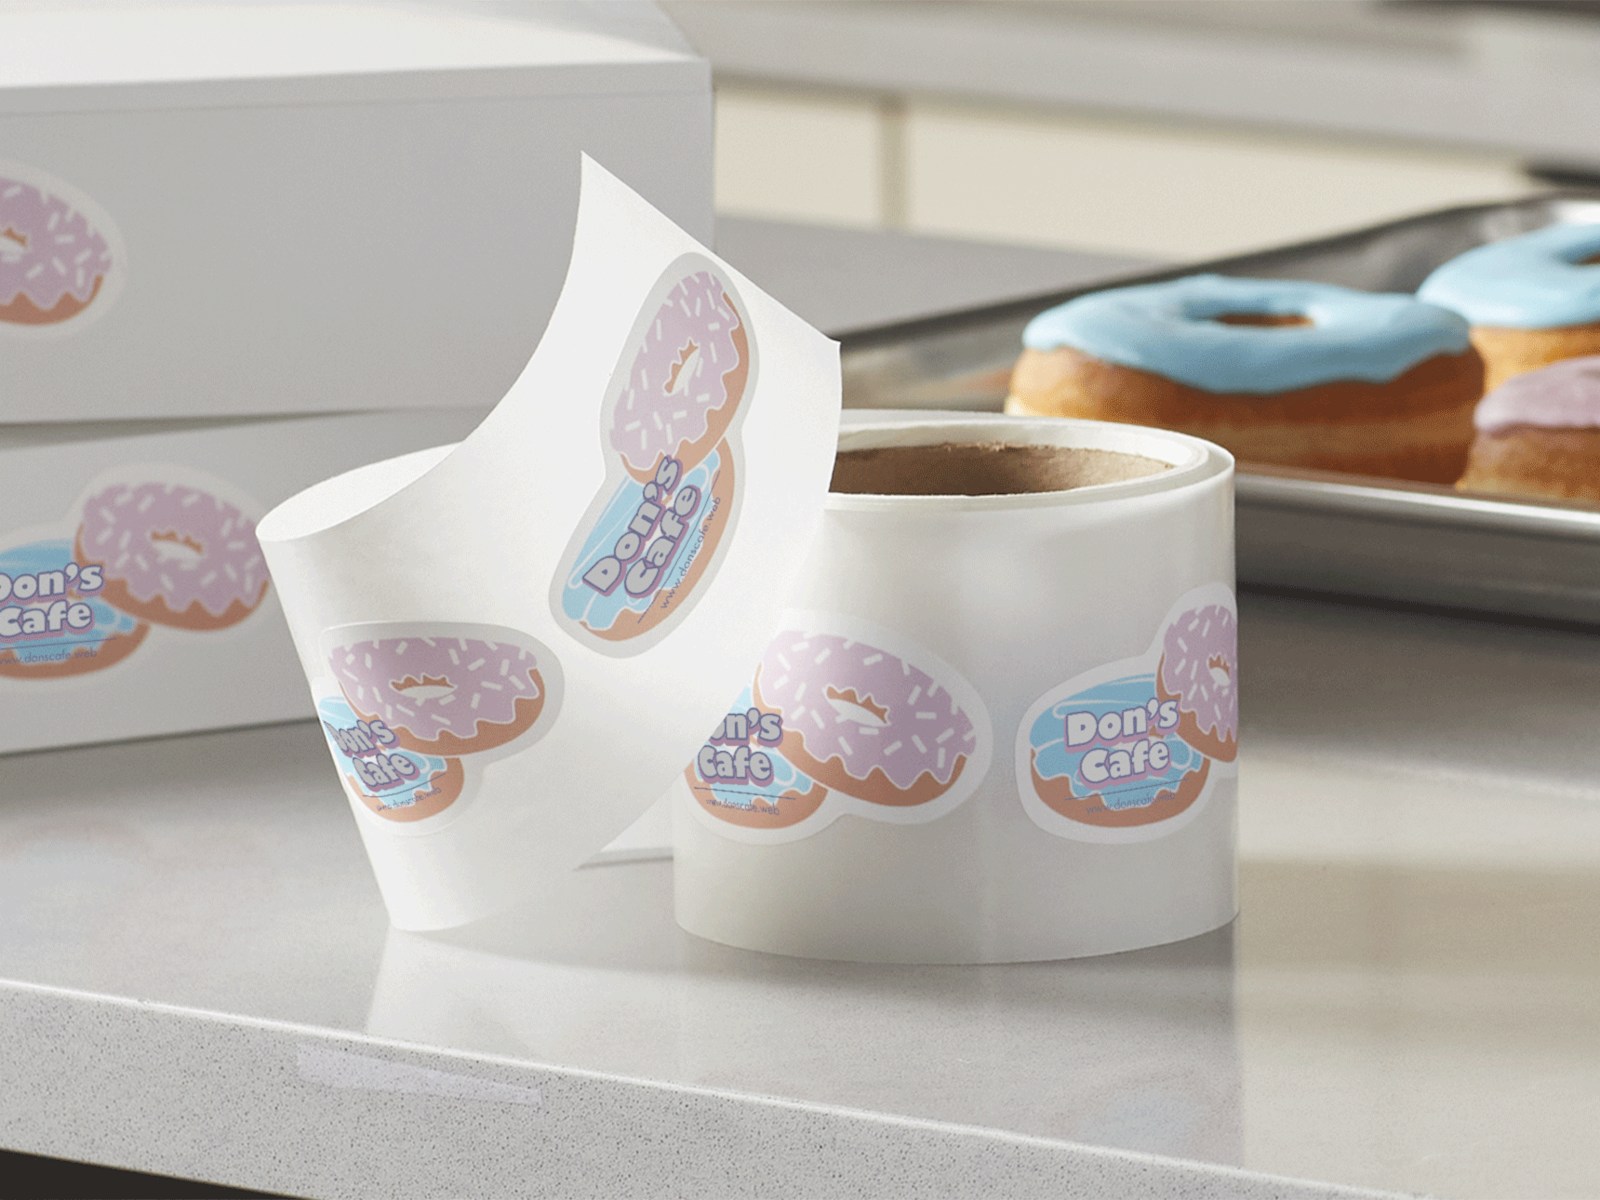 A roll of die-cut label stickers in the shape of two doughnuts in an offset stack placed on a countertop infront of two boughnut boxes, and a tray of doughnuts.